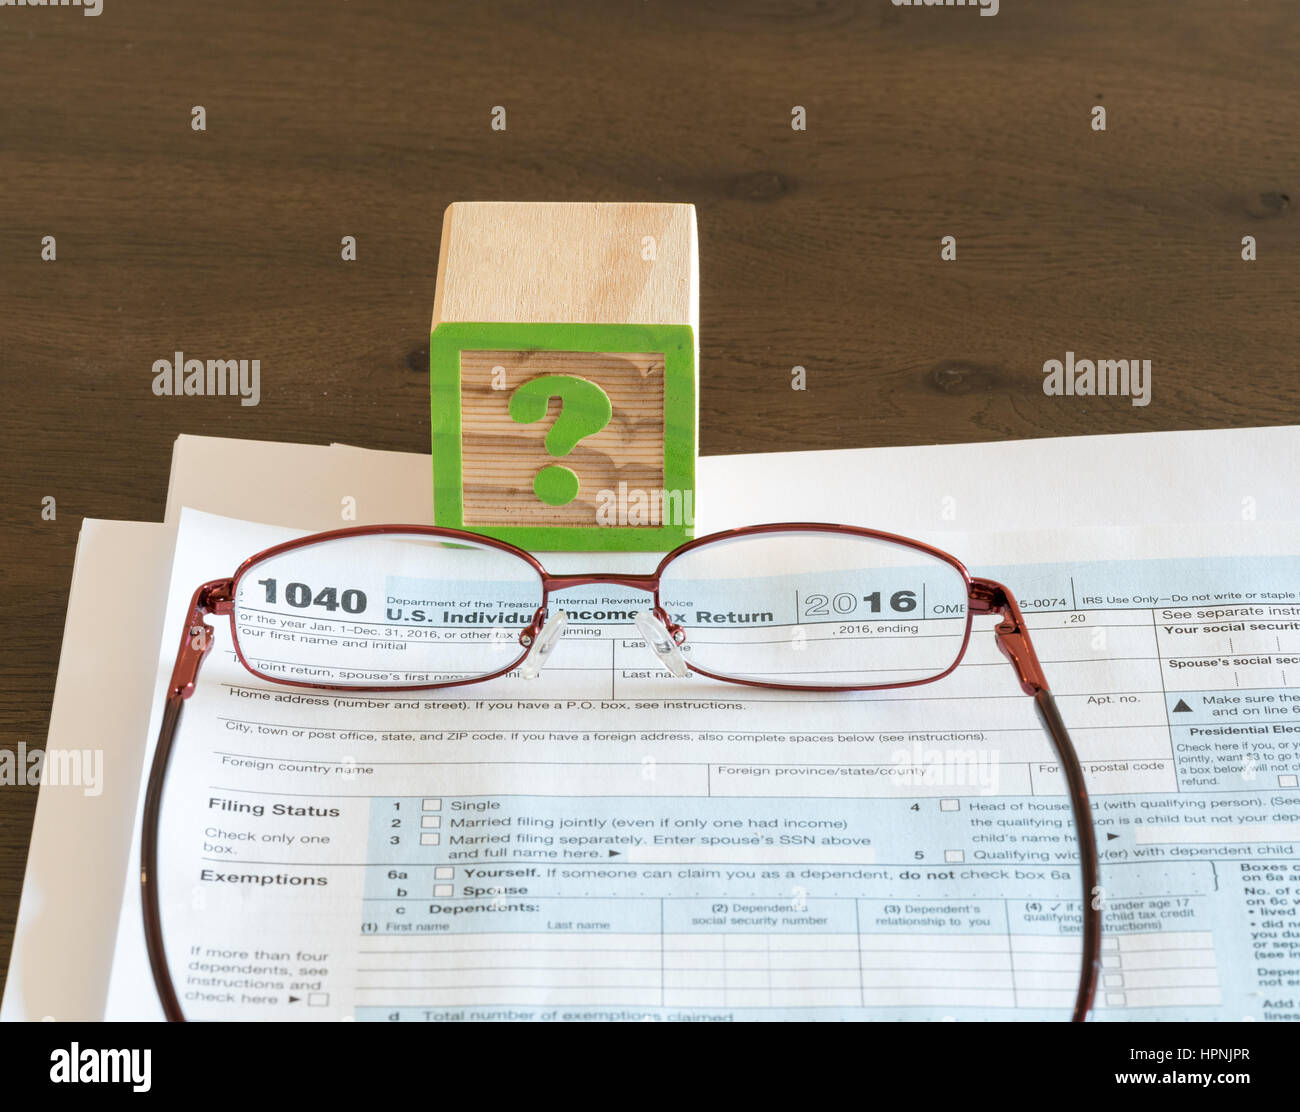 Question mark wooden block illustrating problems or issues in completing US IRS tax form Stock Photo